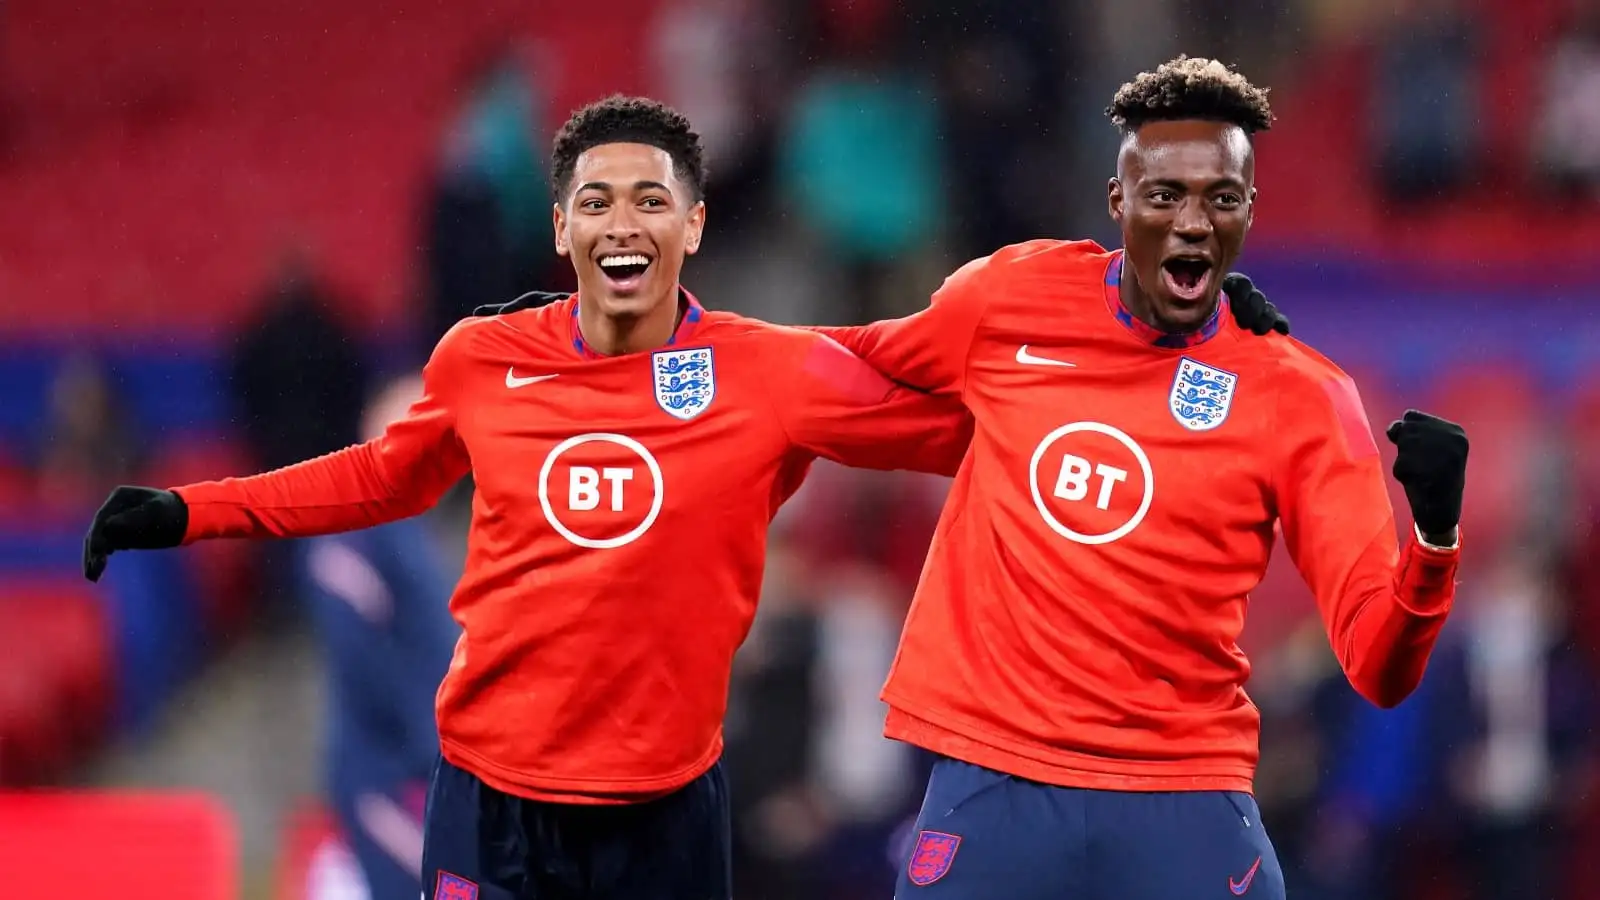 Jude Bellingham and Tammy Abraham